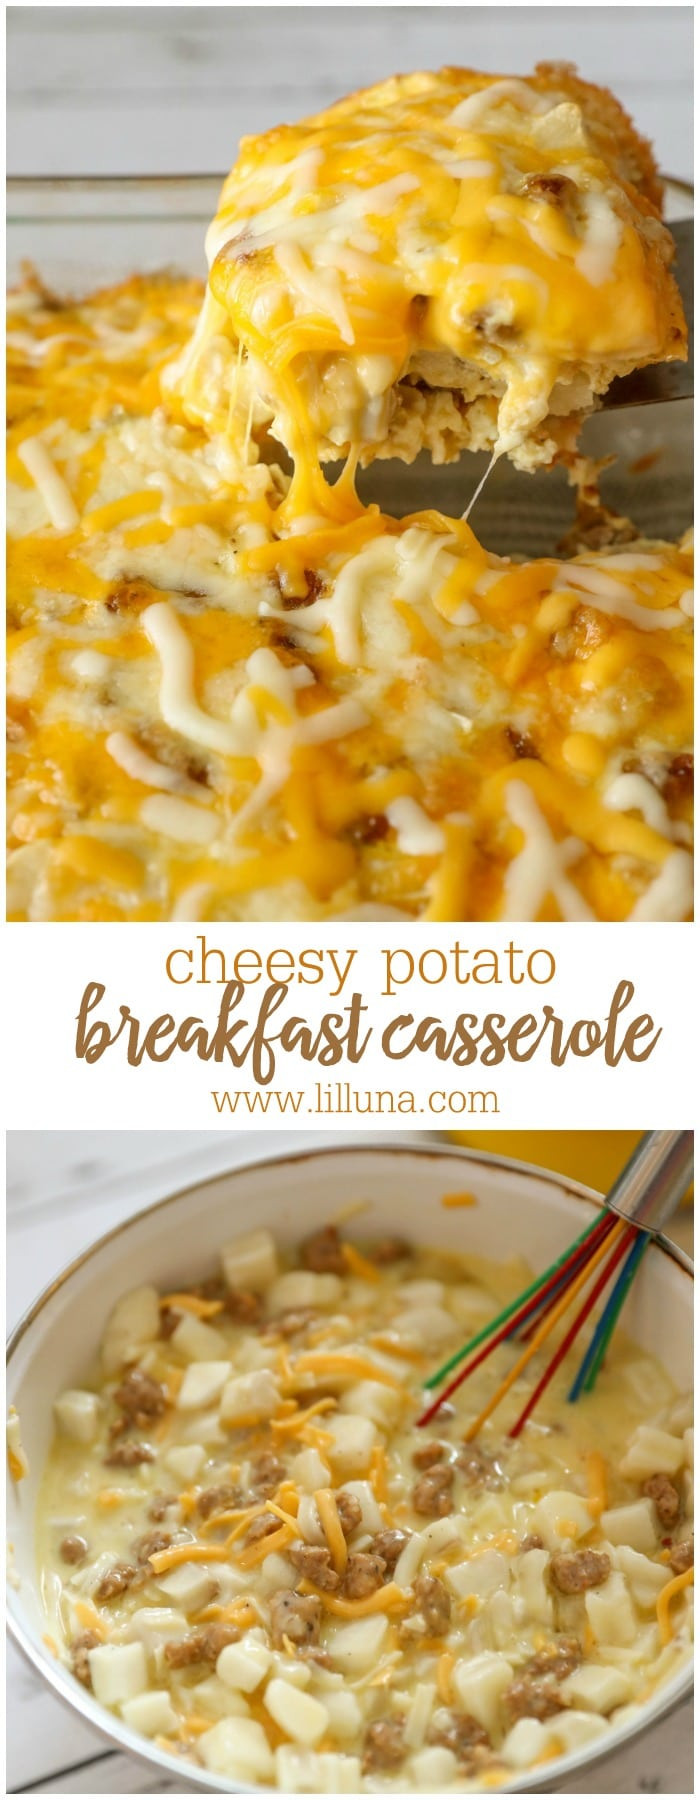 Breakfast Casserole With Potatoes Sausage Eggs And Cheese
 Cheesy Potato Breakfast Casserole